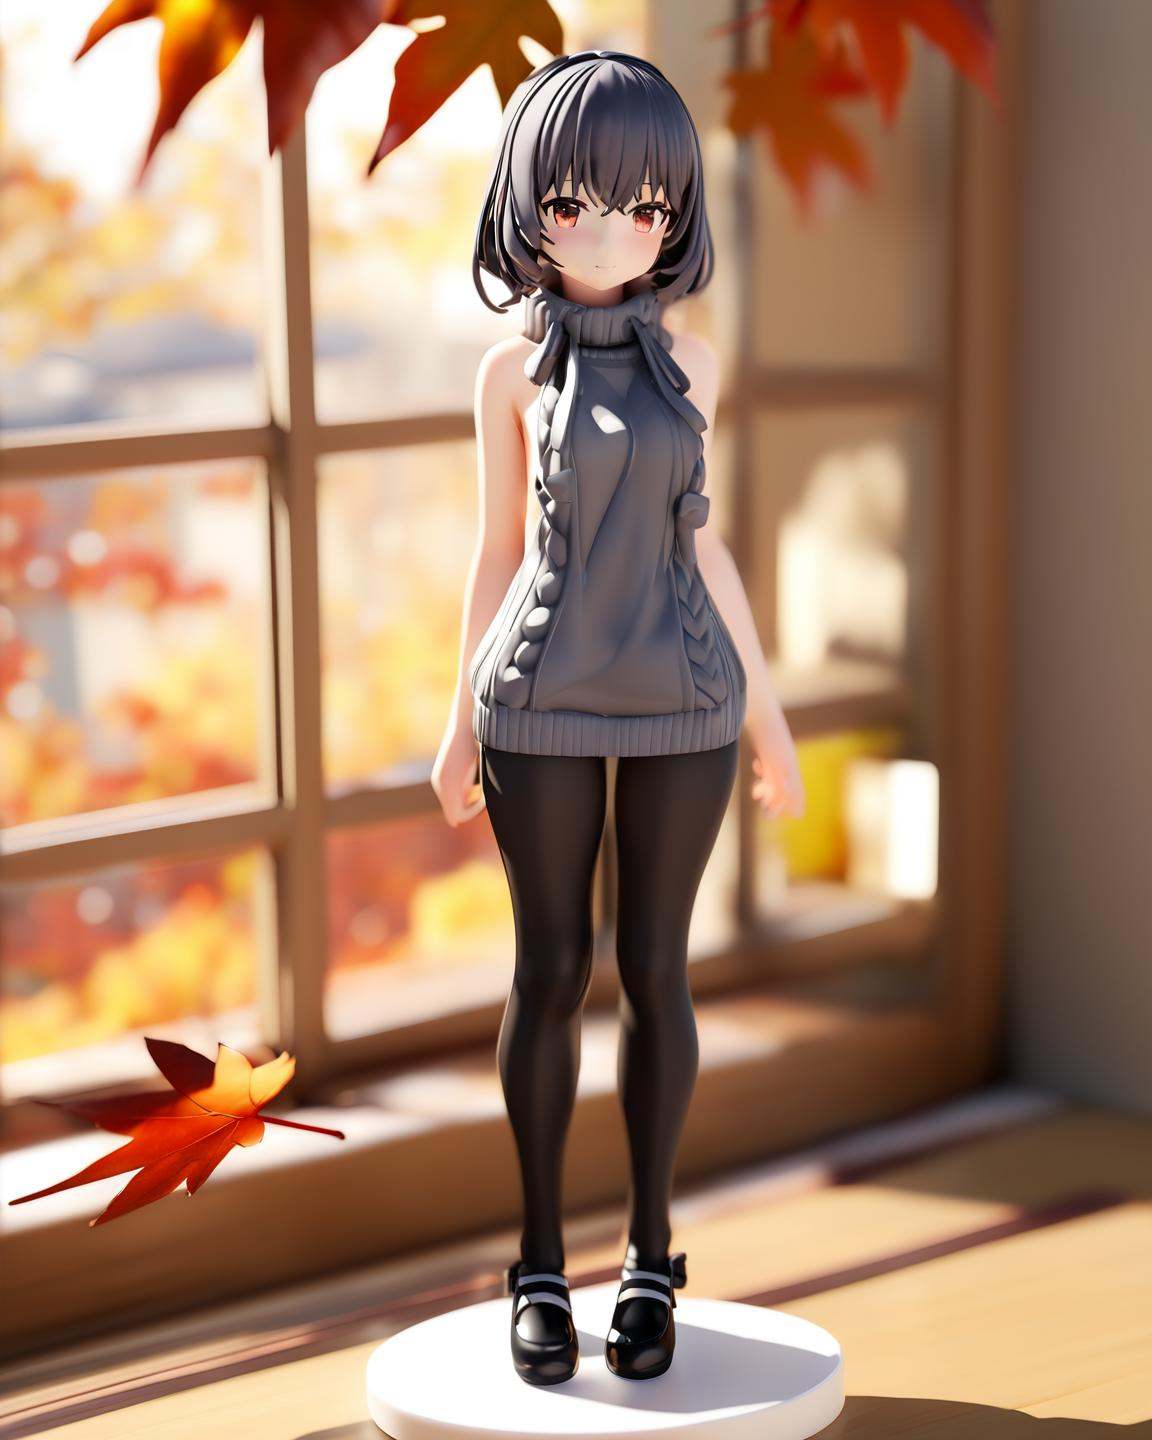 PVC, 3D, 1 girl + solo + looking at the audience + detailed face +(deadpan :1.2)+ Virgin killer sweater + black tights + Mary Jane shoes + fine details + Standing + full body image + Autumn + sunshine, masterpiece, best quality, masterpiece, best quality